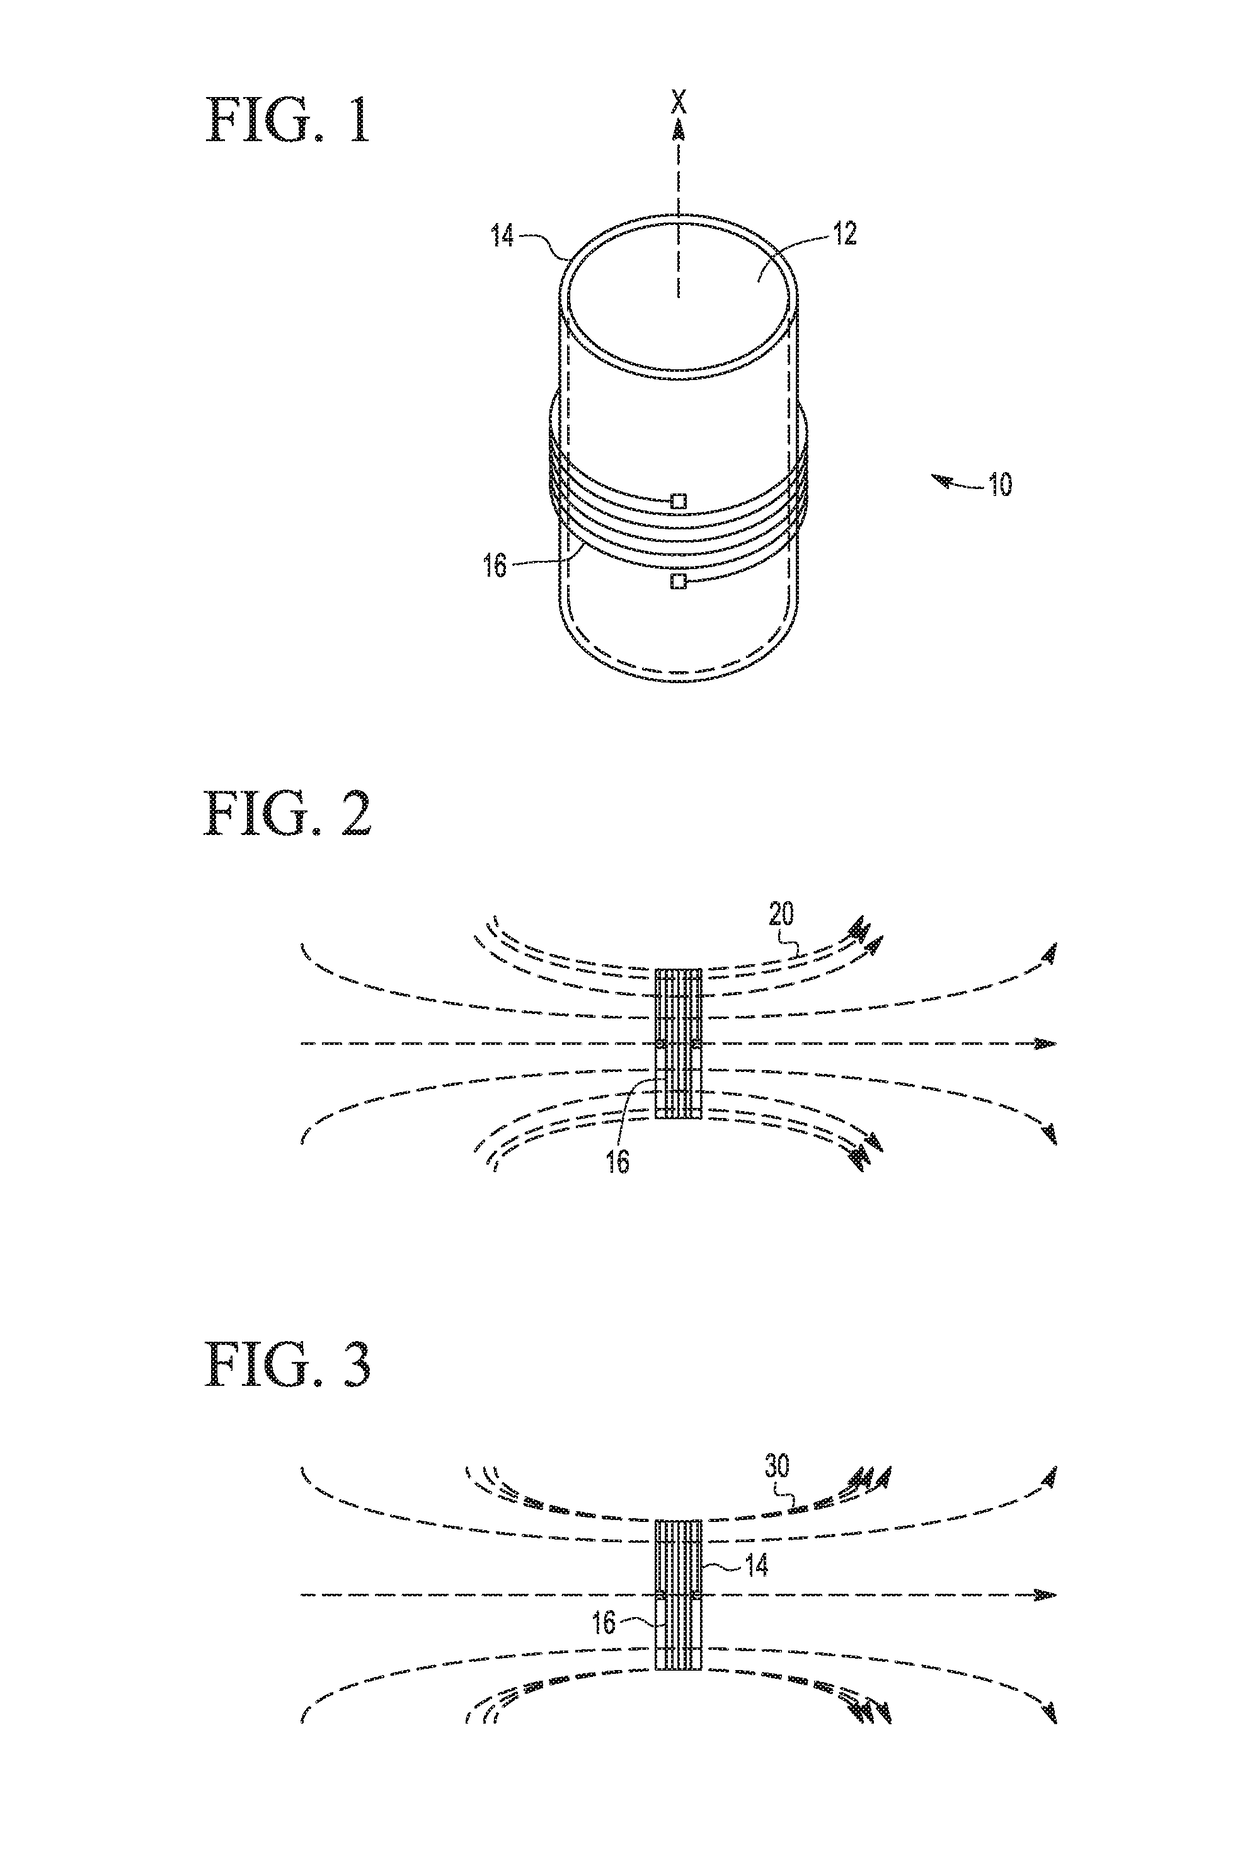 Antenna system for near-field magnetic induction wireless communications